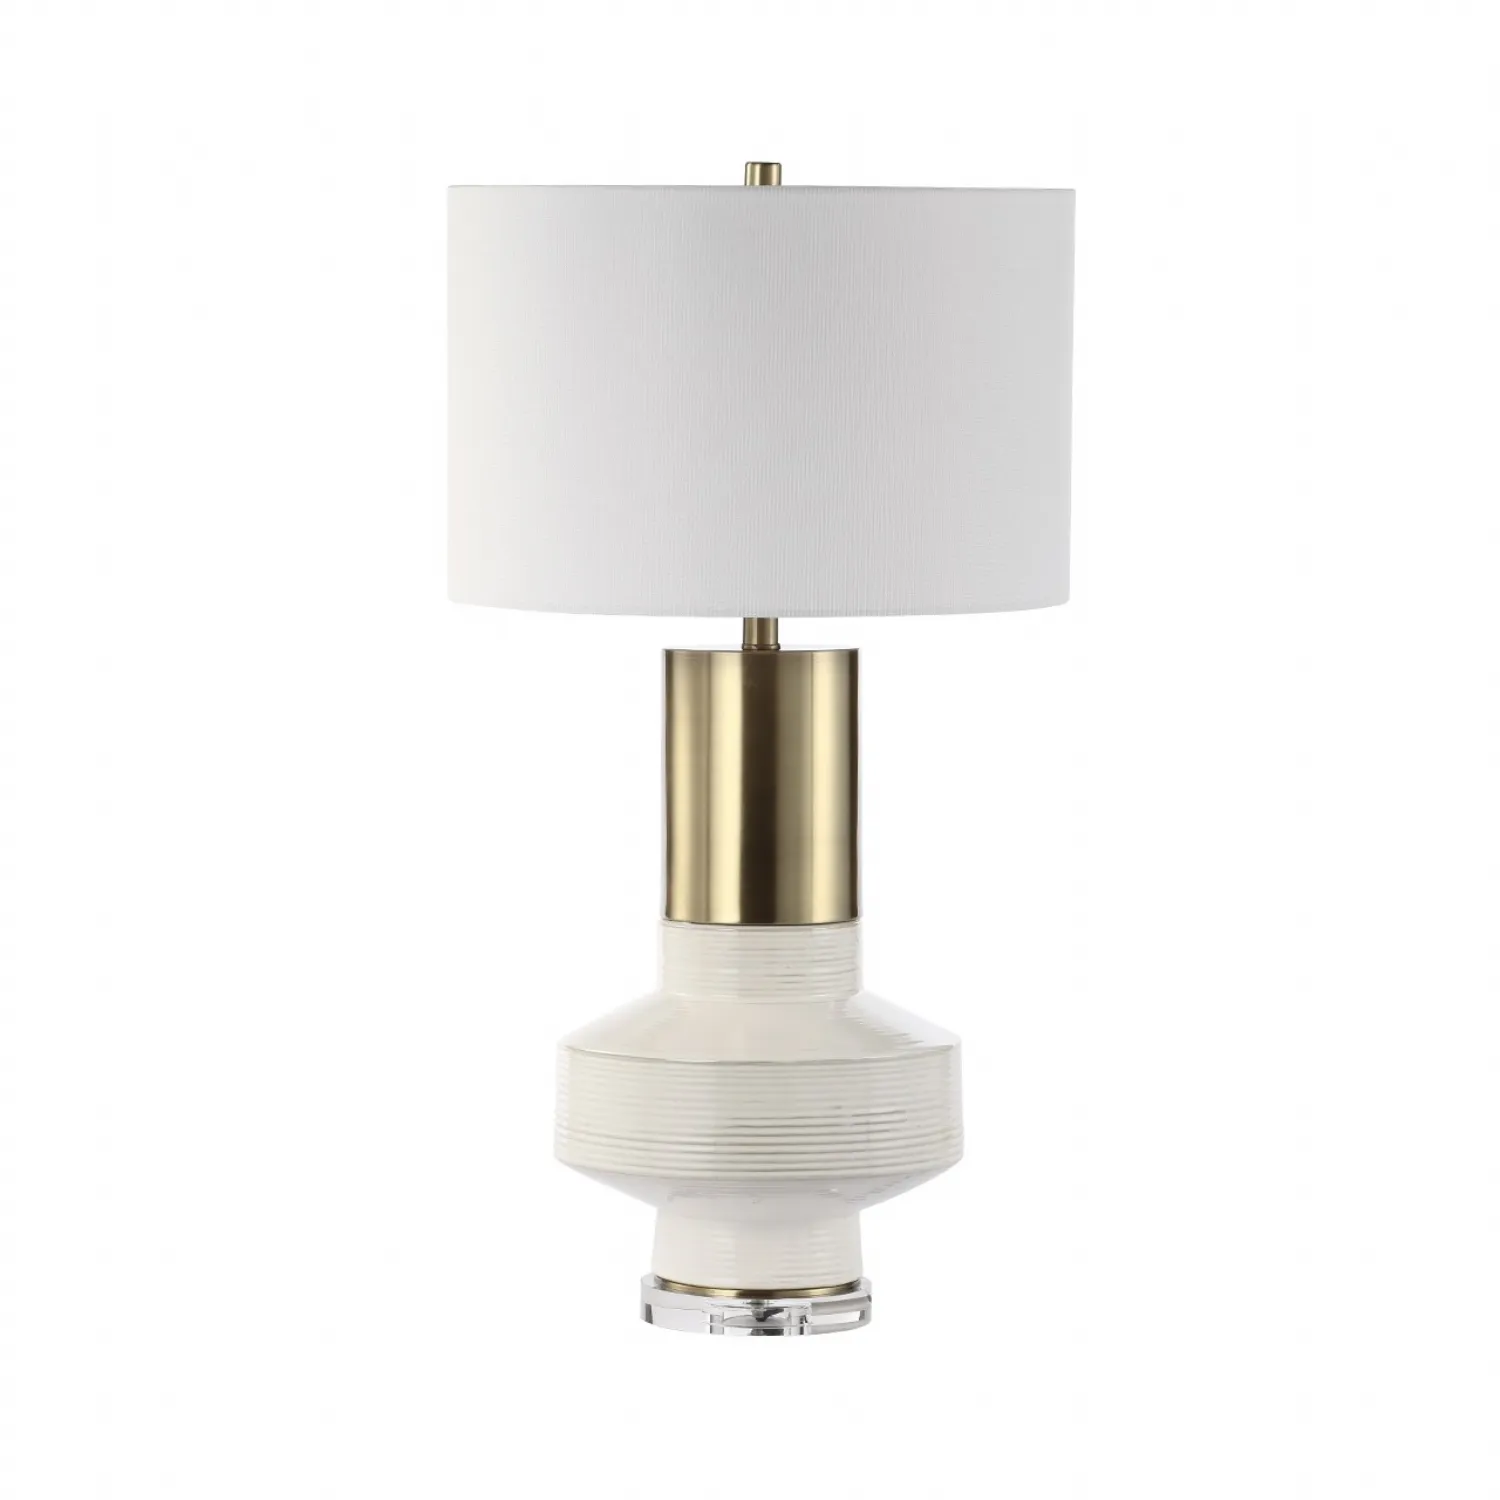 79. 5cm White Ceramic Table Lamp With White Linen Shade